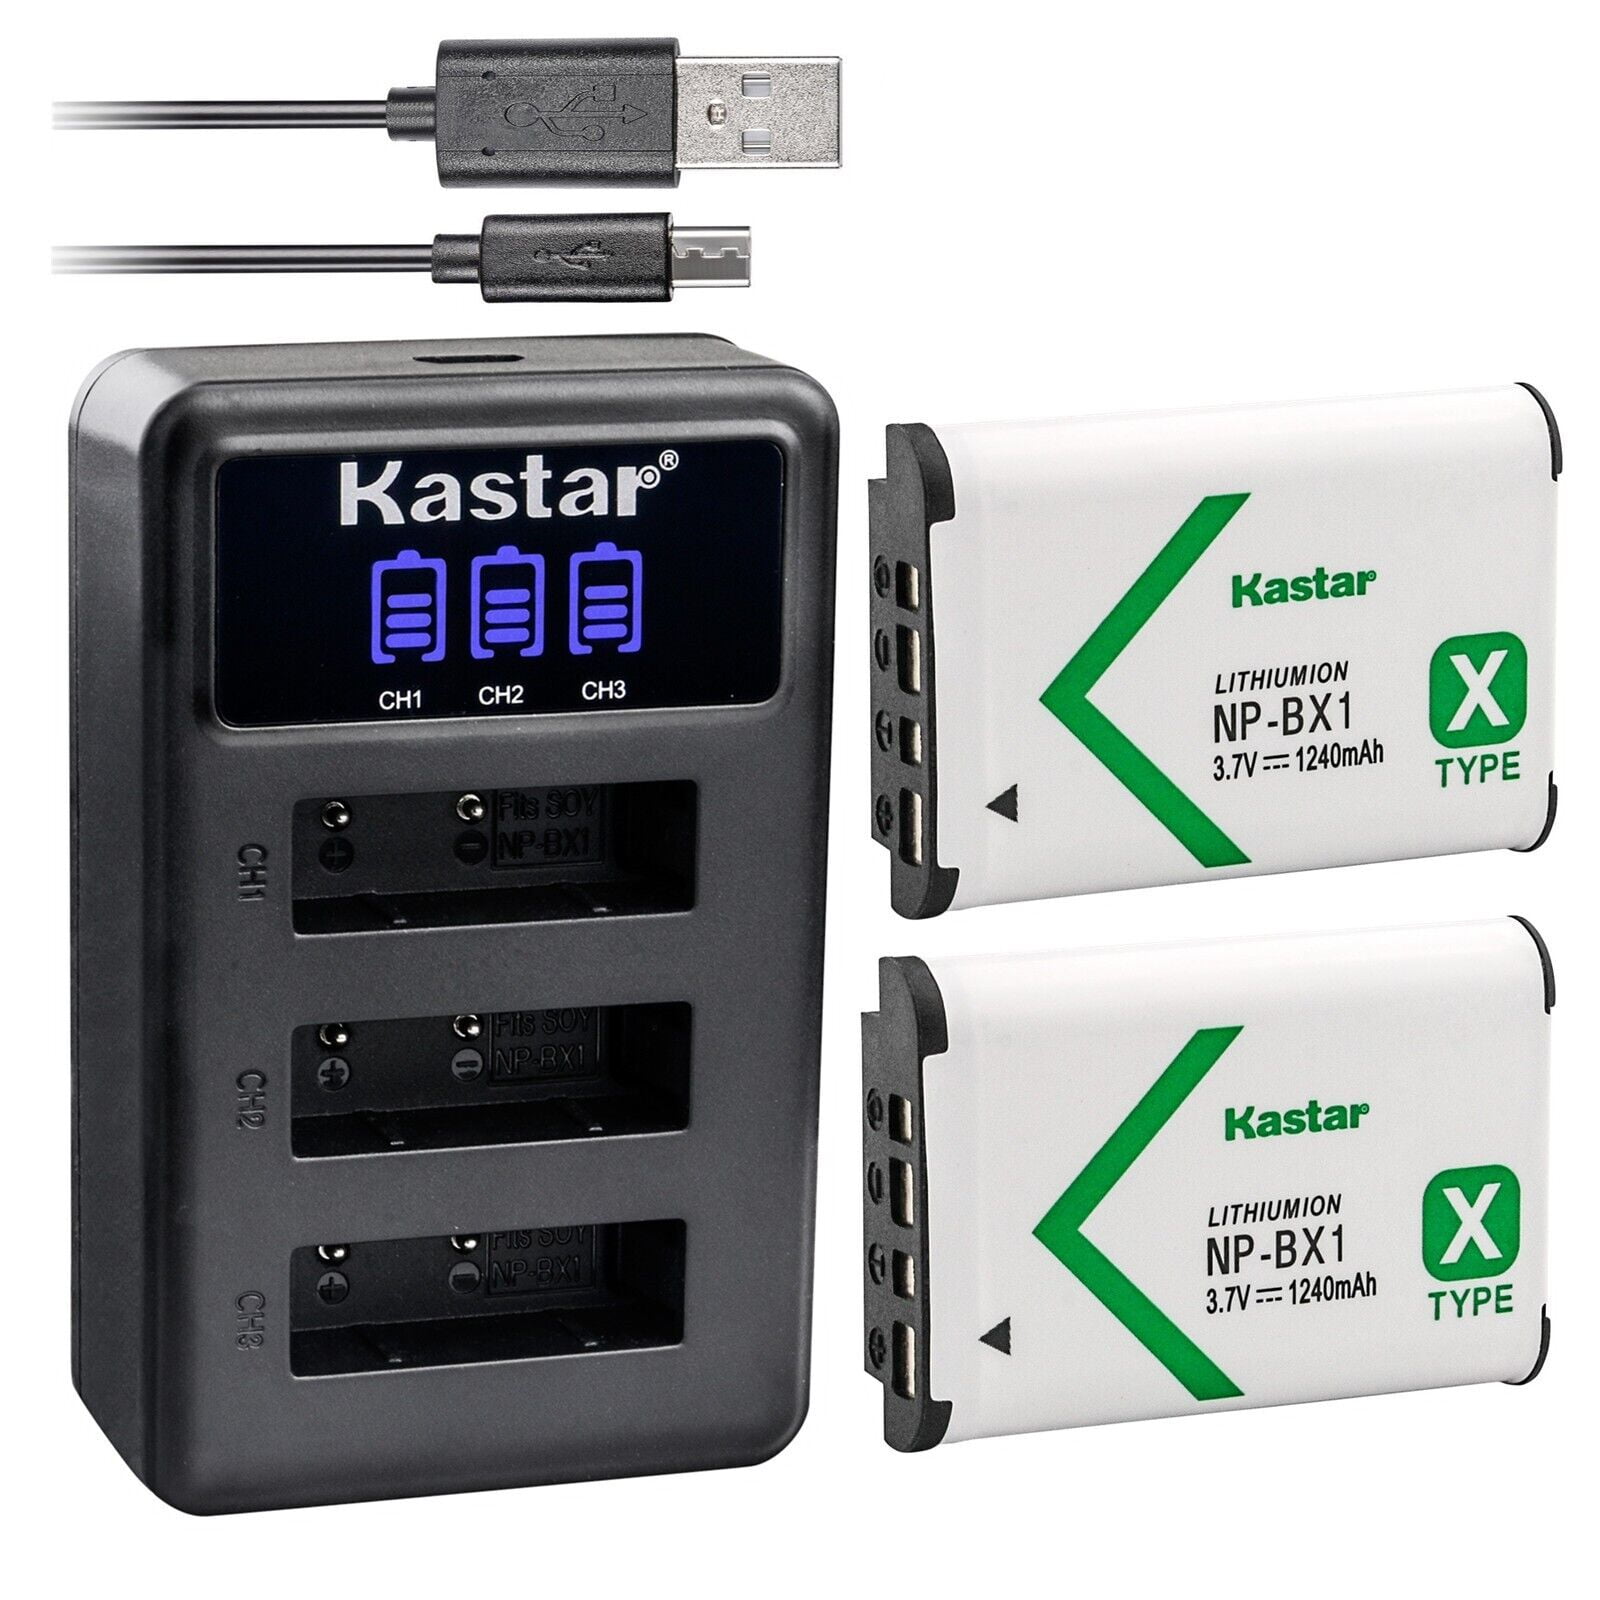 Kastar 2 Pack NP-BX1 Battery and LCD Triple USB Charger Compatible